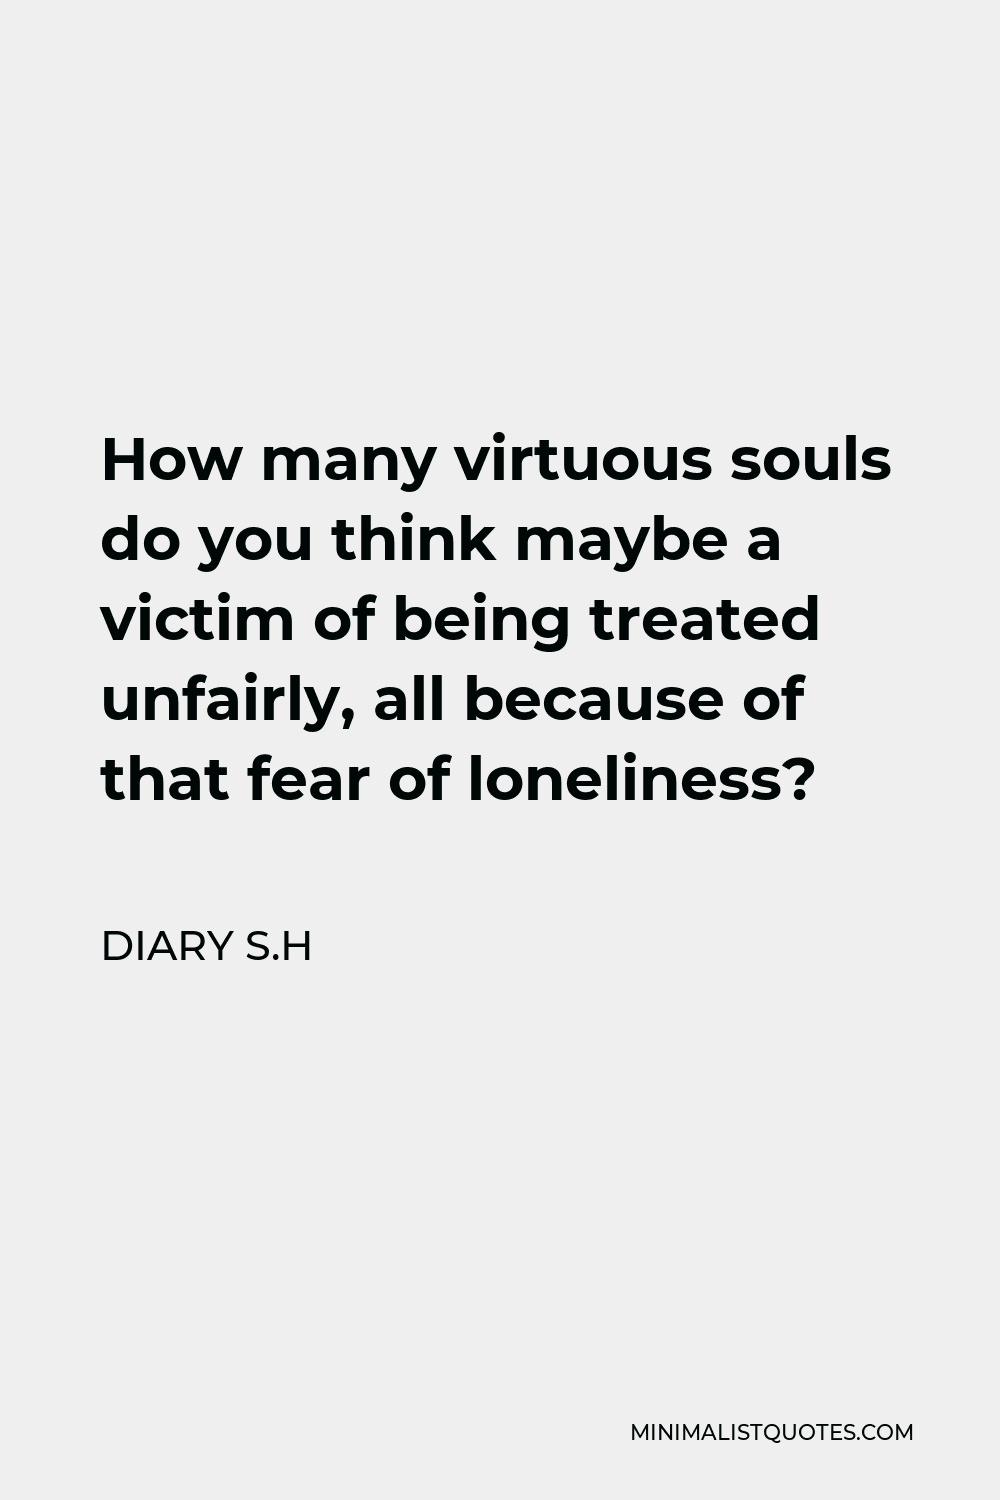 Diary S.H Quote - How many virtuous souls do you think maybe a victim of being treated unfairly, all because of that fear of loneliness?